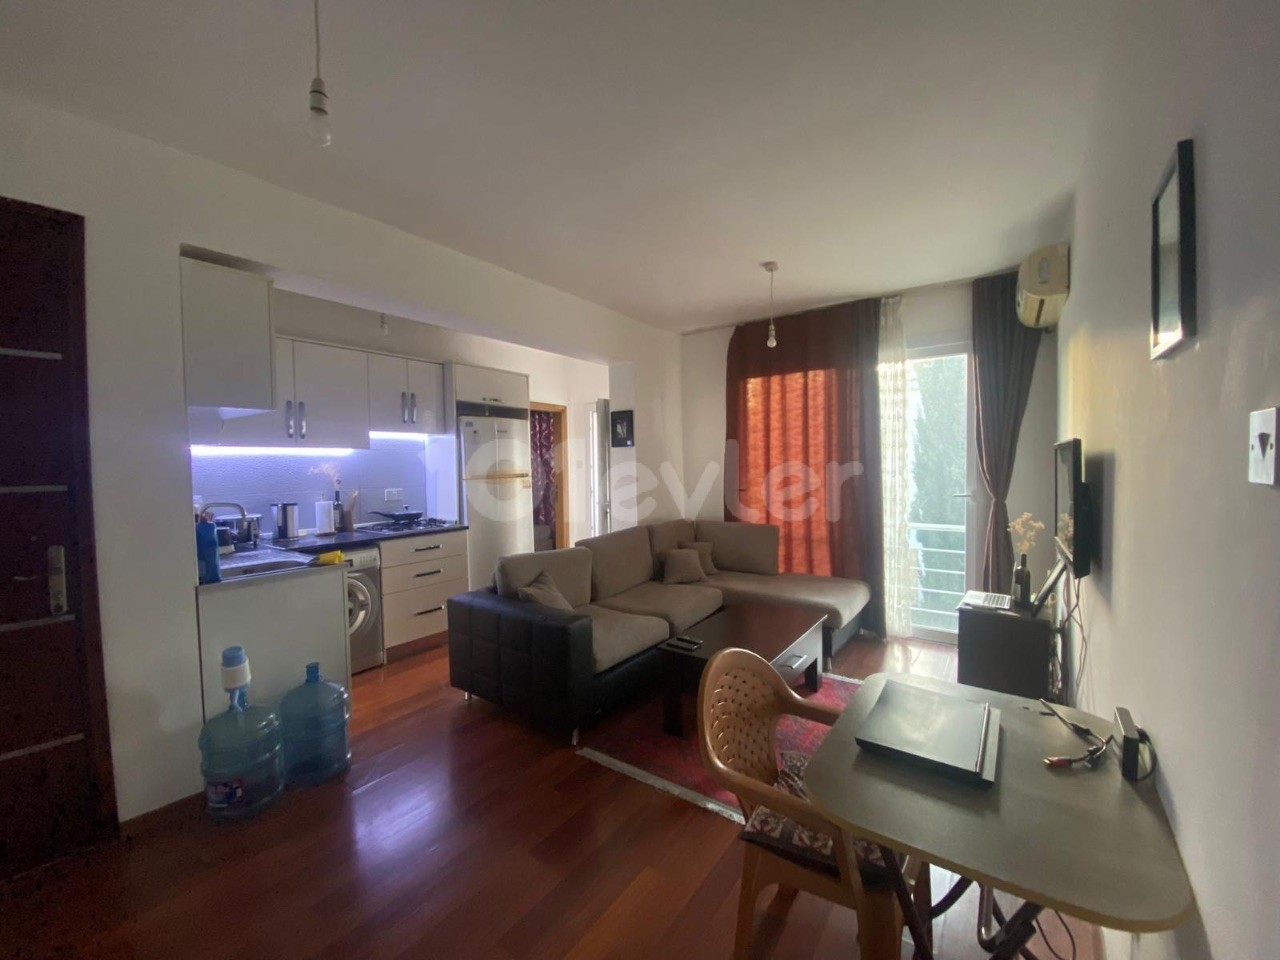 2+1 Flat for Rent in Kyrenia Center, near the old nusmar market